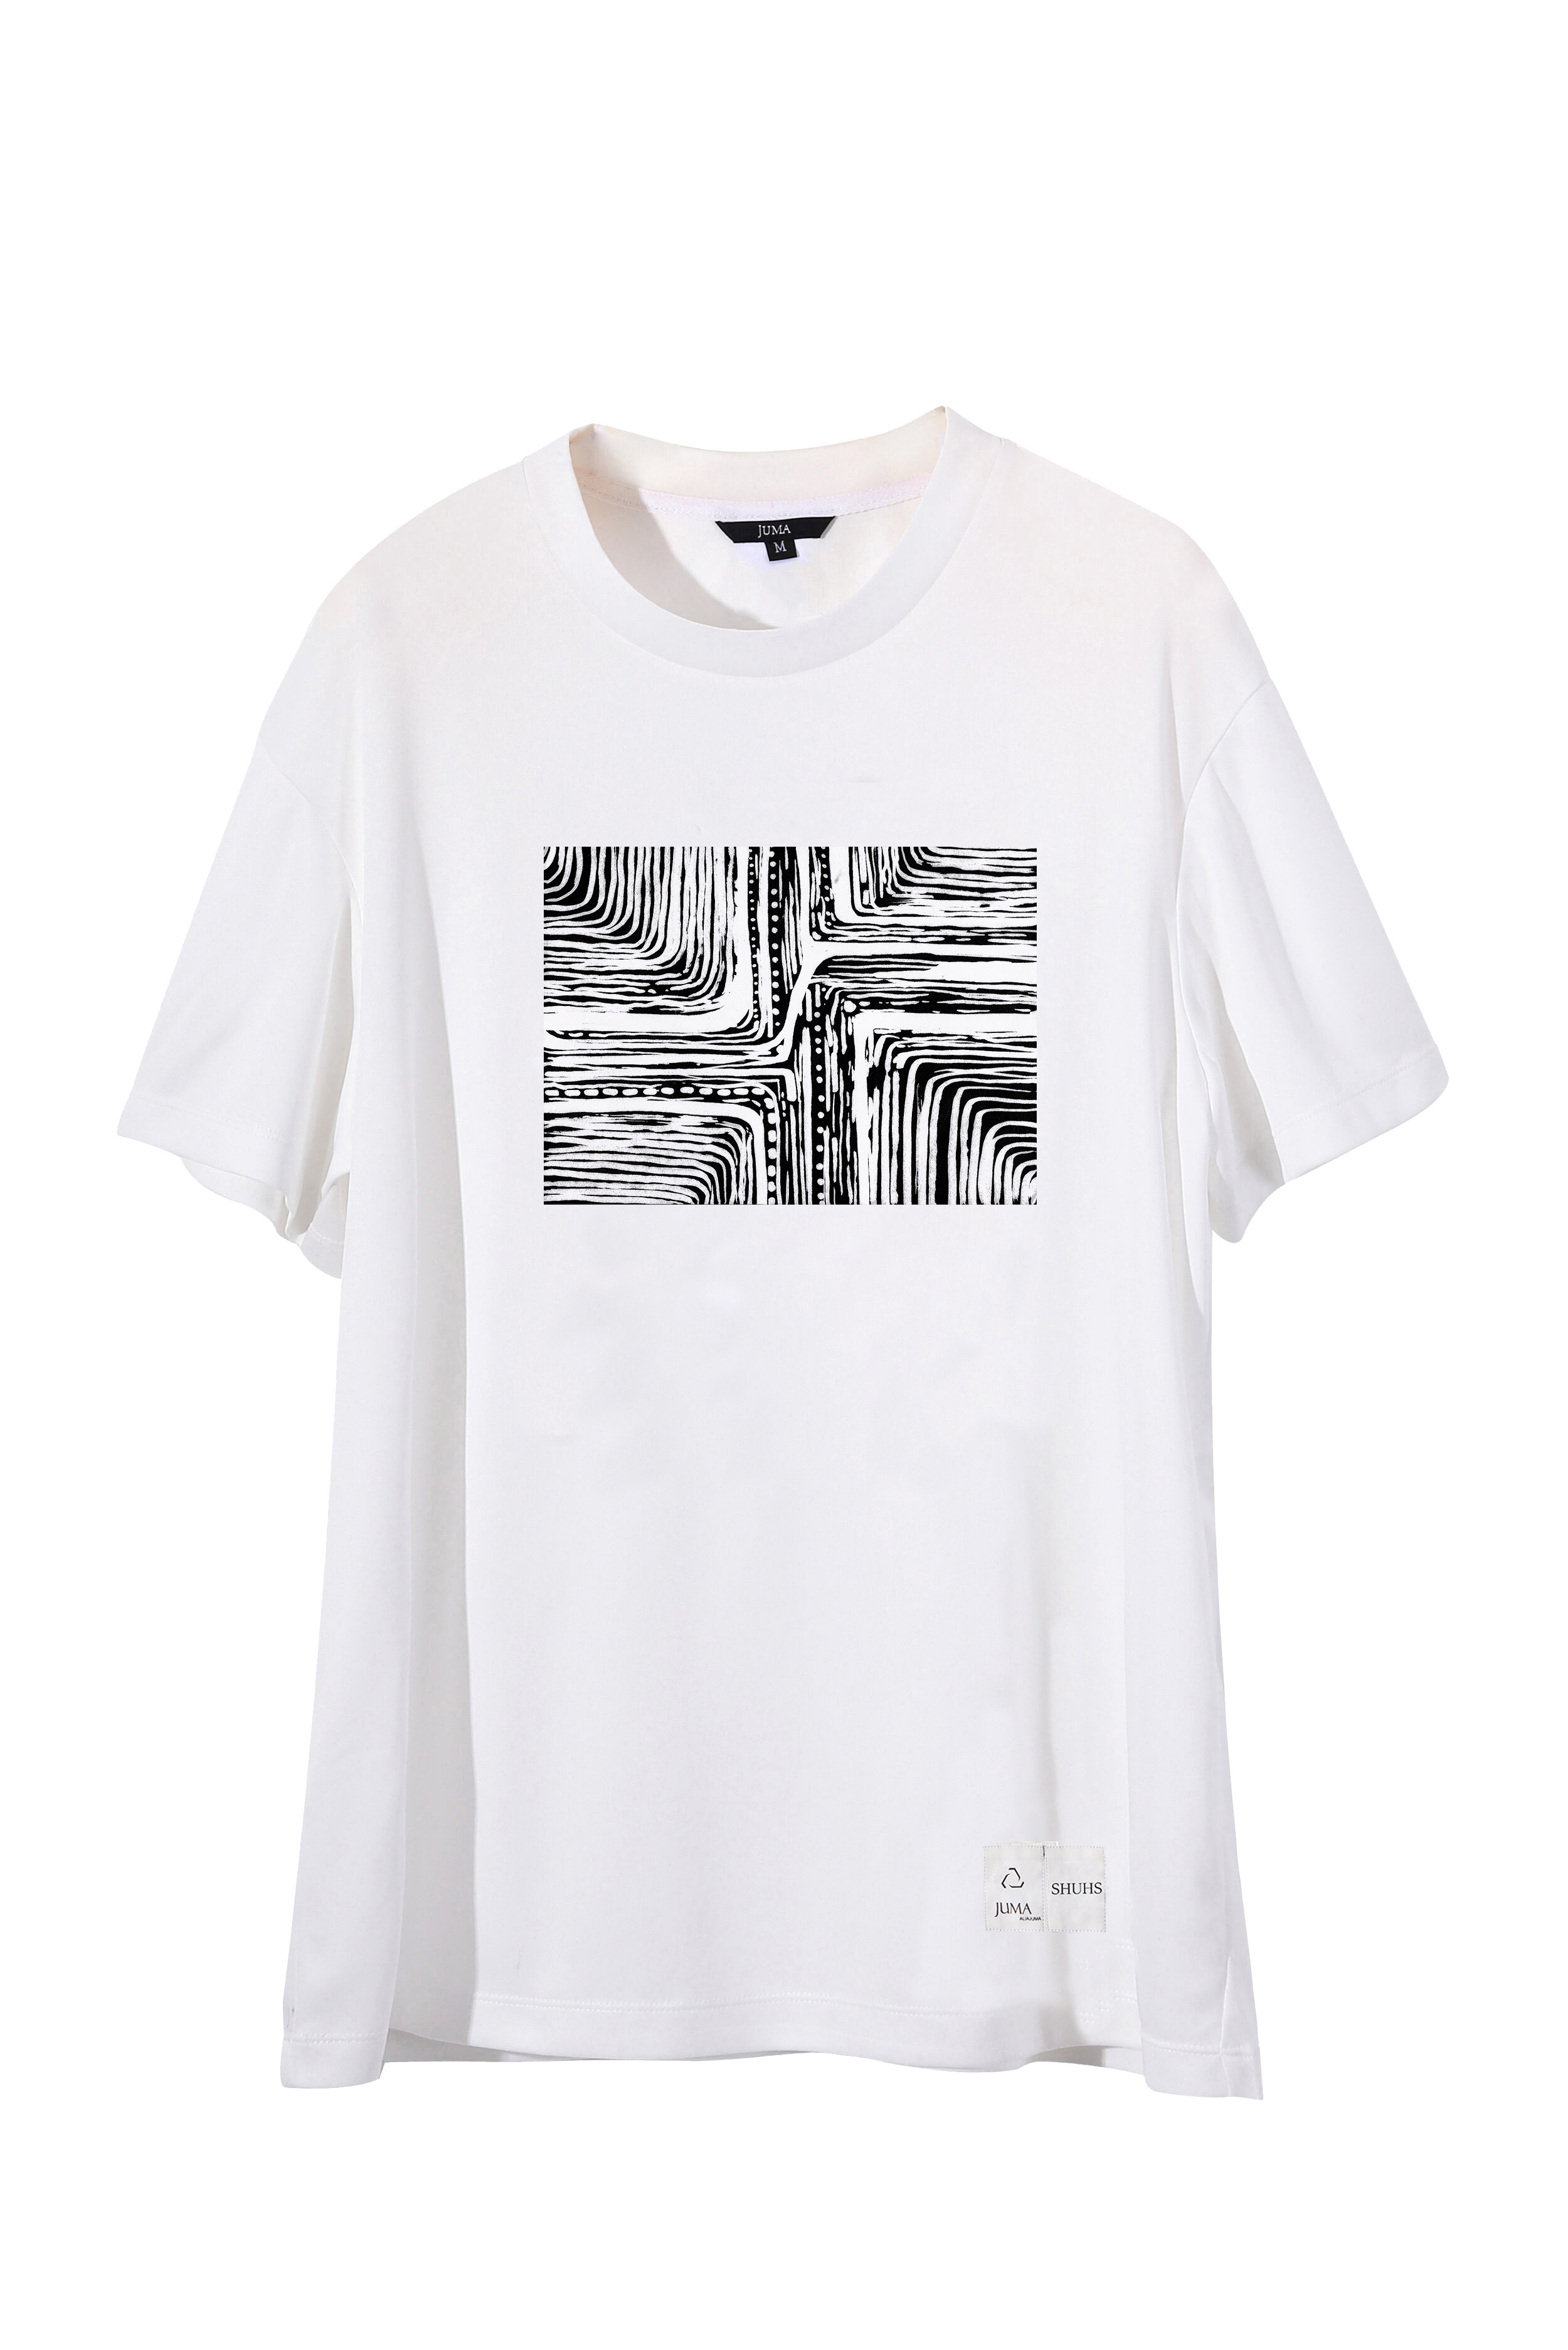 Recharge 印花 2 件 T 恤 - 4 个再生水瓶 - 白色的｜Recharge Print 2 T-Shirt - 4 Recycled Water Bottles-White